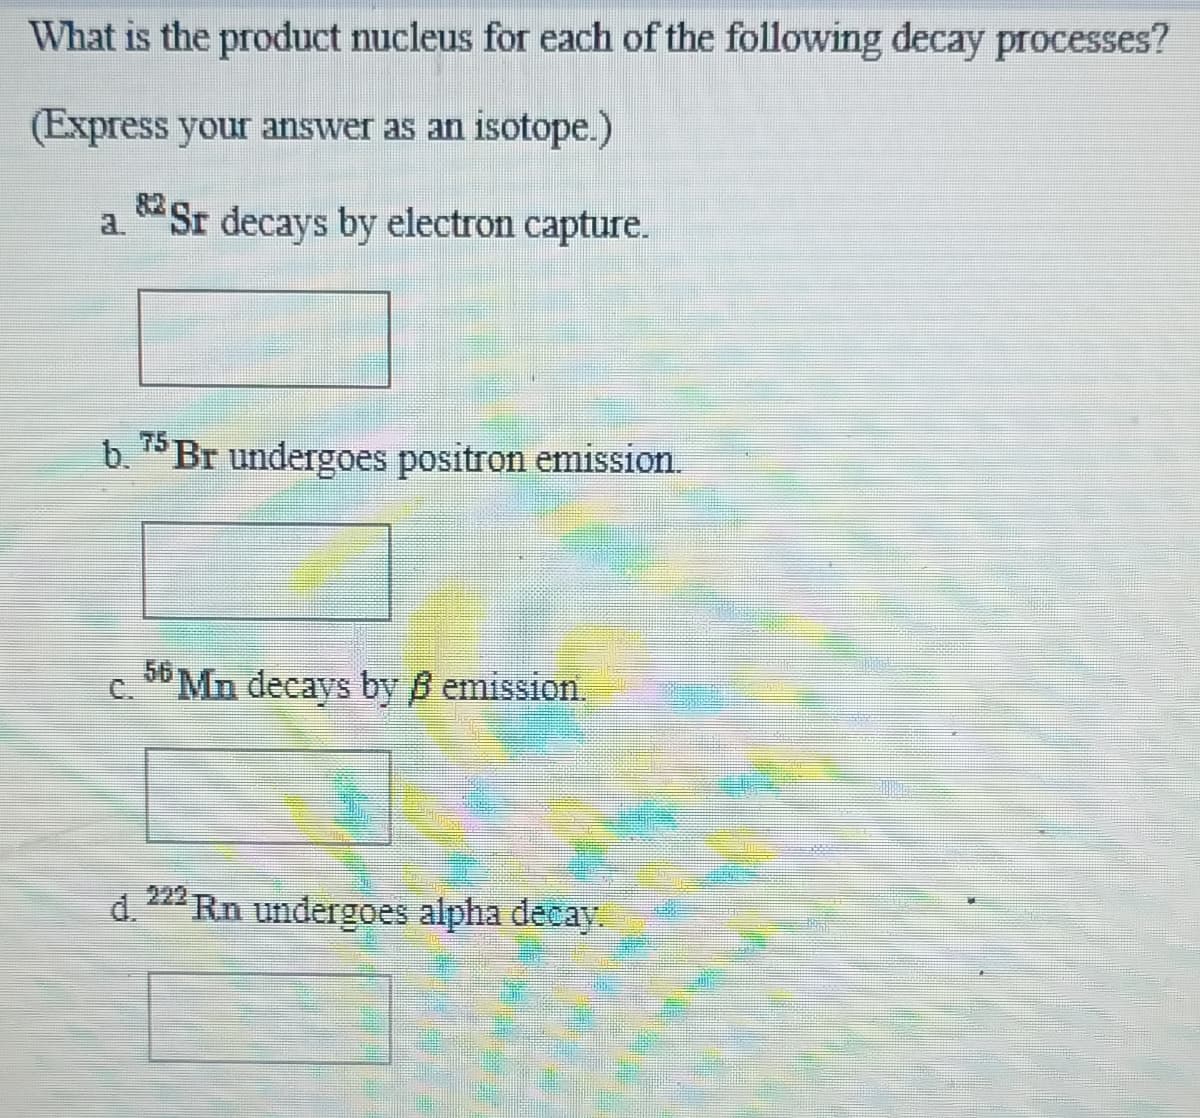 What is the product nucleus for each of the following decay processes?
(Express your answer as an isotope.)
Sr decays by electron capture.
a.
b. 75 Br undergoes positron emission.
c. 36 Mn decays by B emission.
d.
222 Rn undergoes alpha decay.
